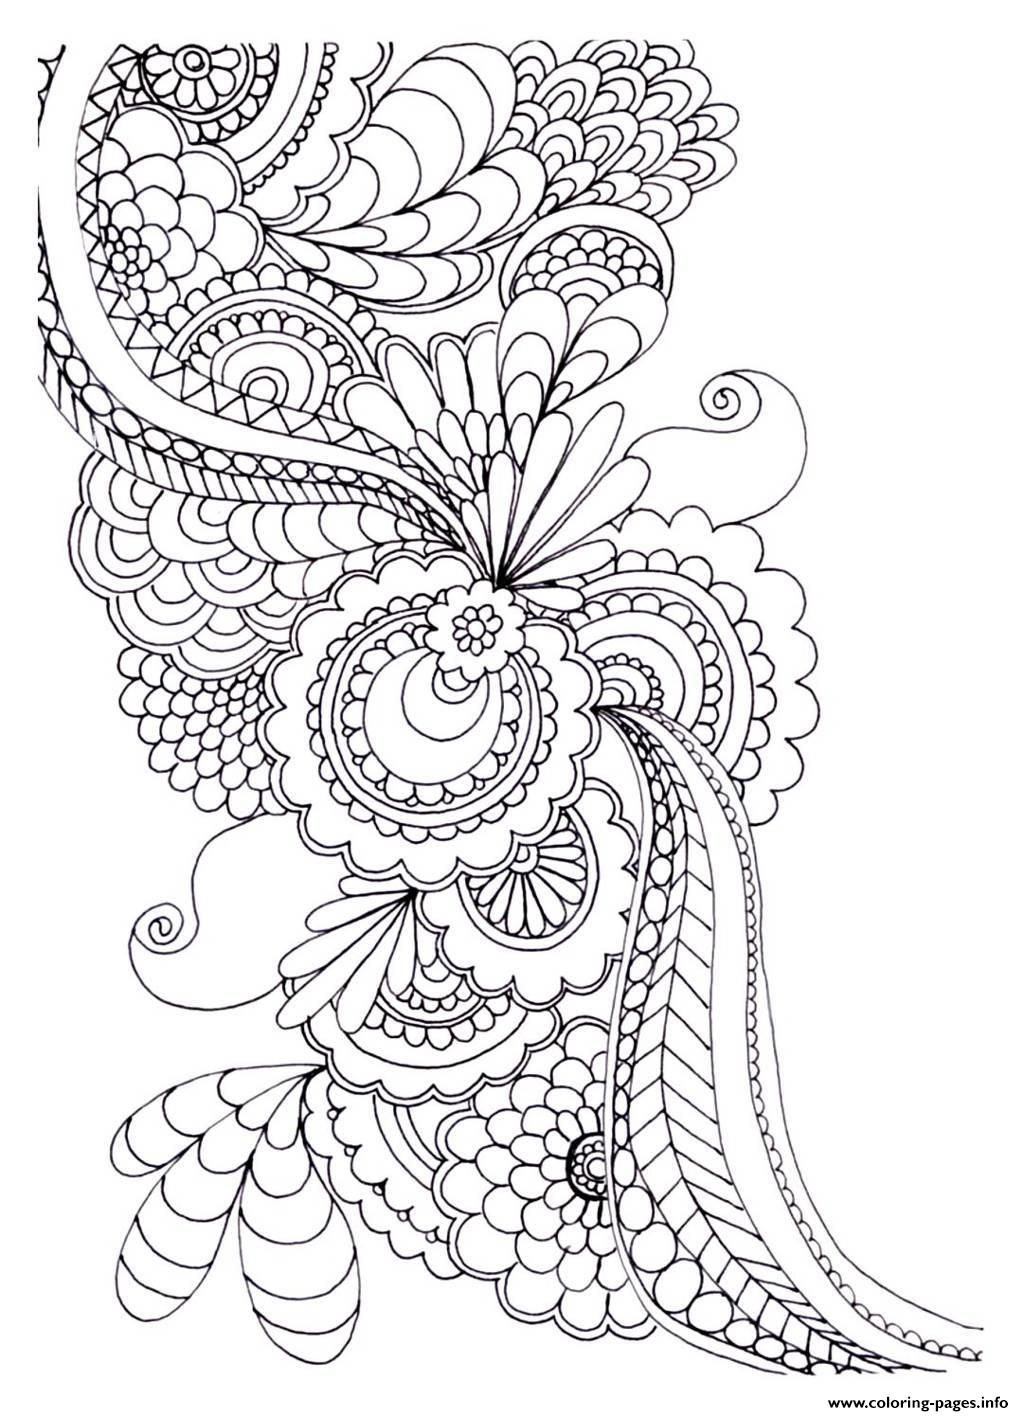 Coloring Pages : Printable Drawings Of Flowers Download Them Or - Free Printable Flower Coloring Pages For Adults